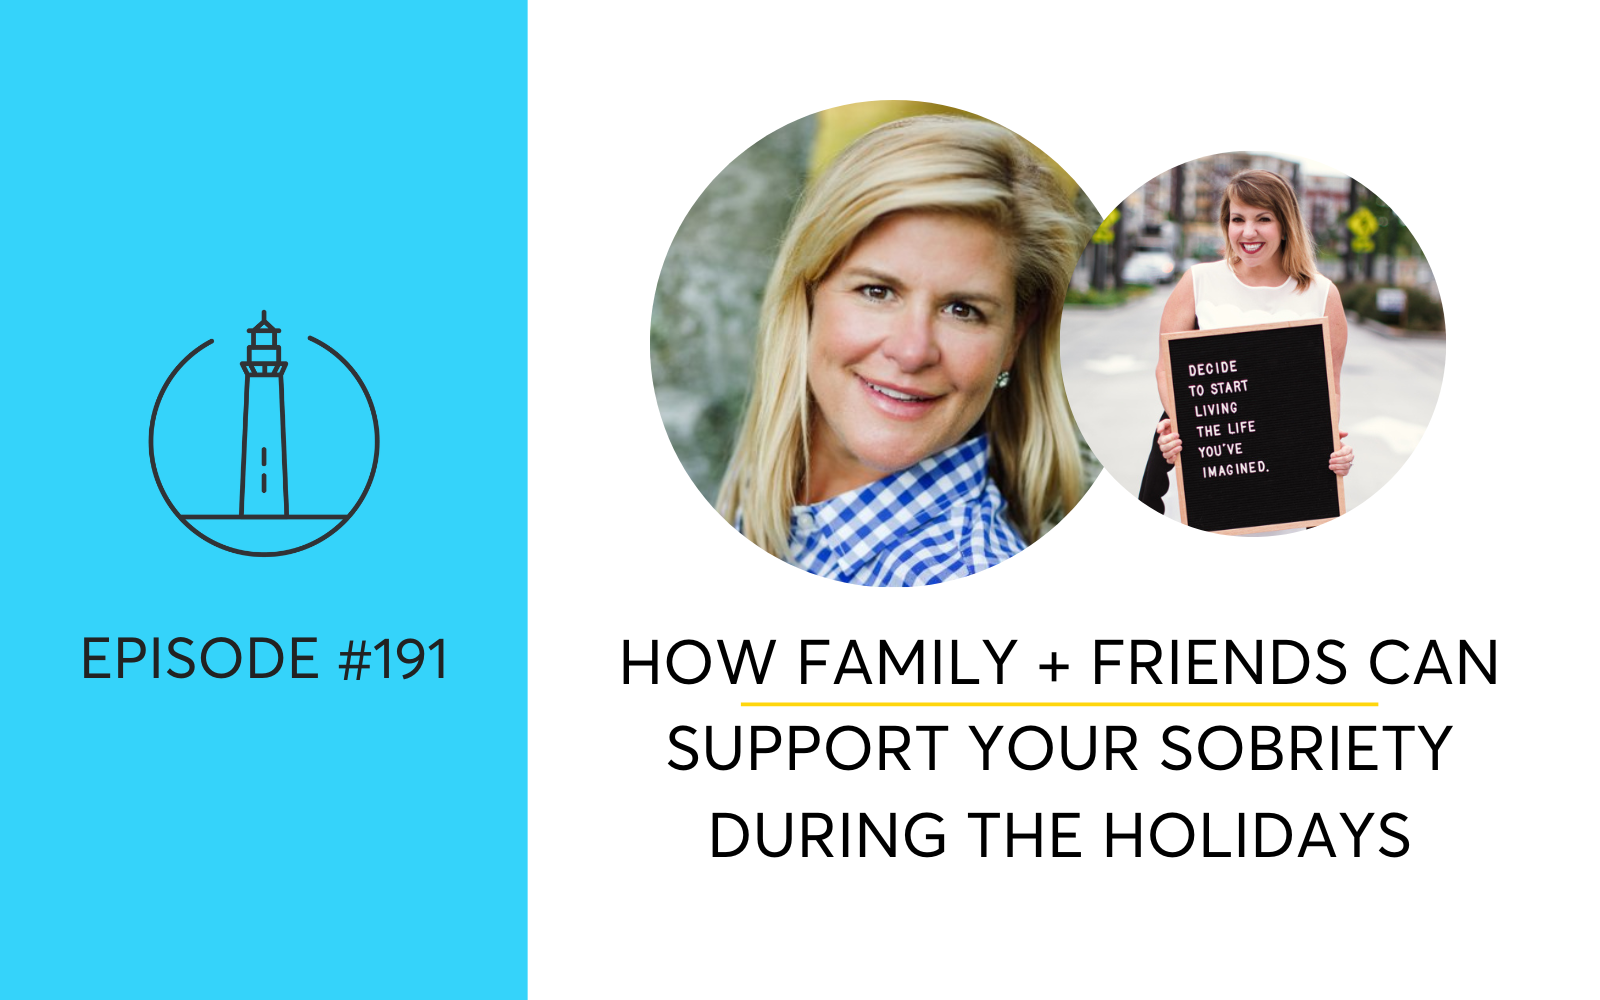 How To Ask Your Family and Friends To Support Your Sobriety During The Holidays